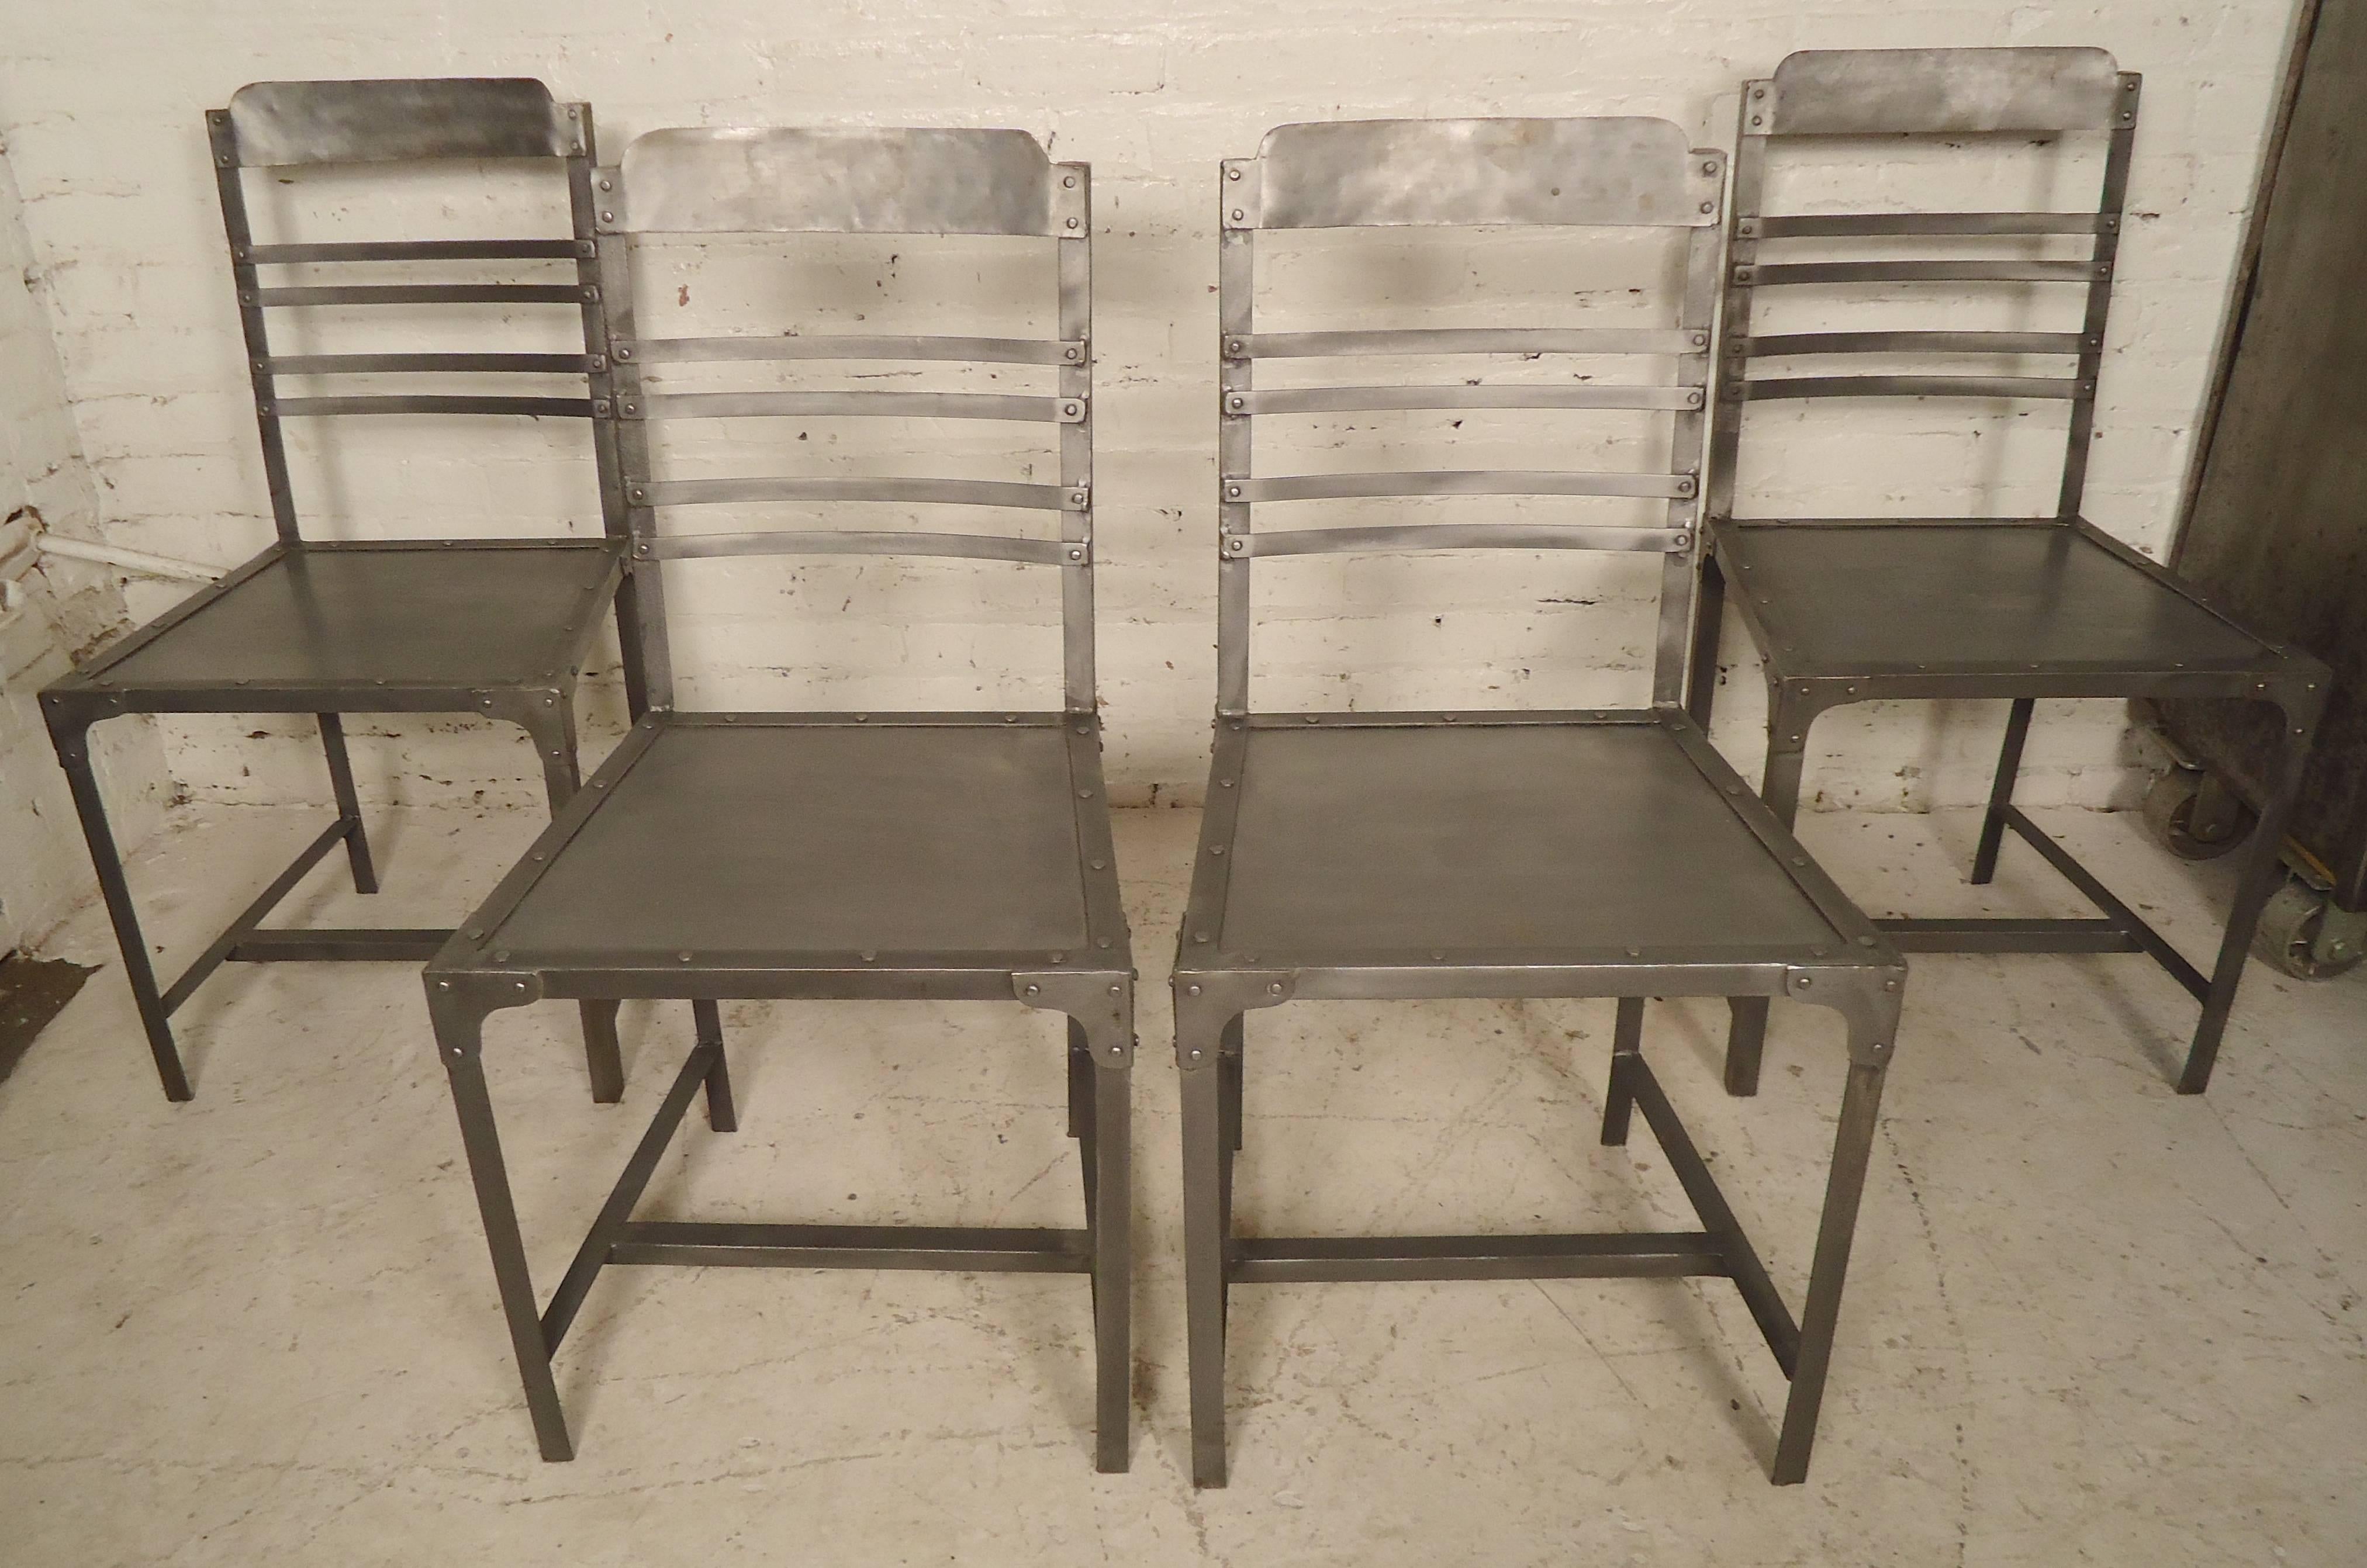 Handsome set of metal chairs in an Industrial style finish. Features exposed nailheads and slat backs.

(Please confirm item location - NY or NJ - with dealer).
 